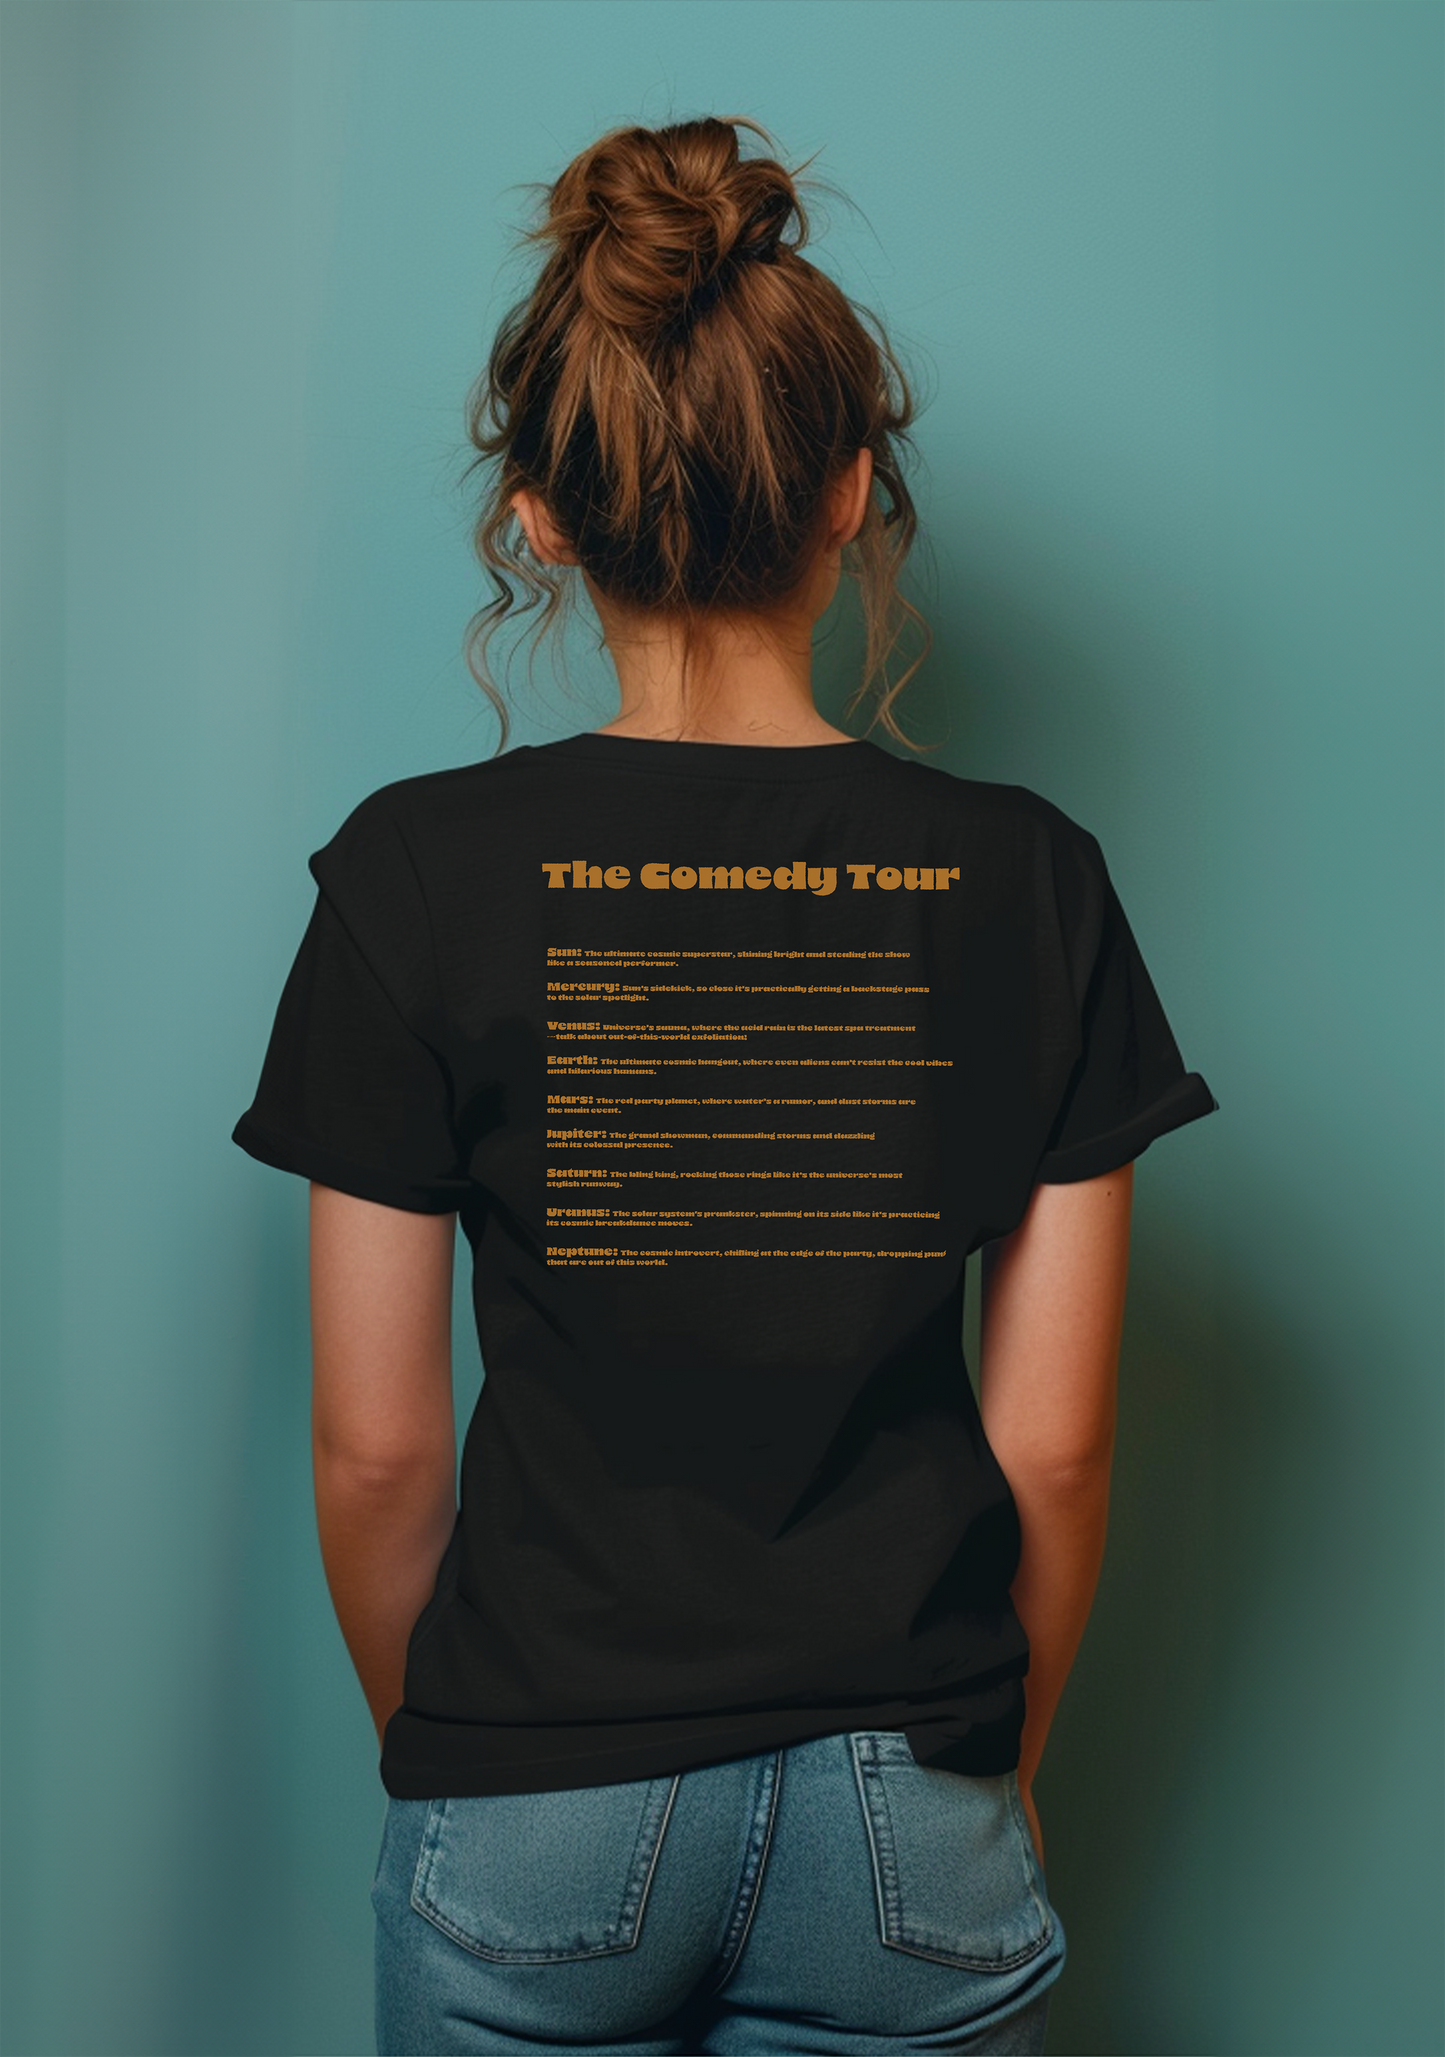 The Solar system Stand Up Show - Half Sleeves Women's Tshirt